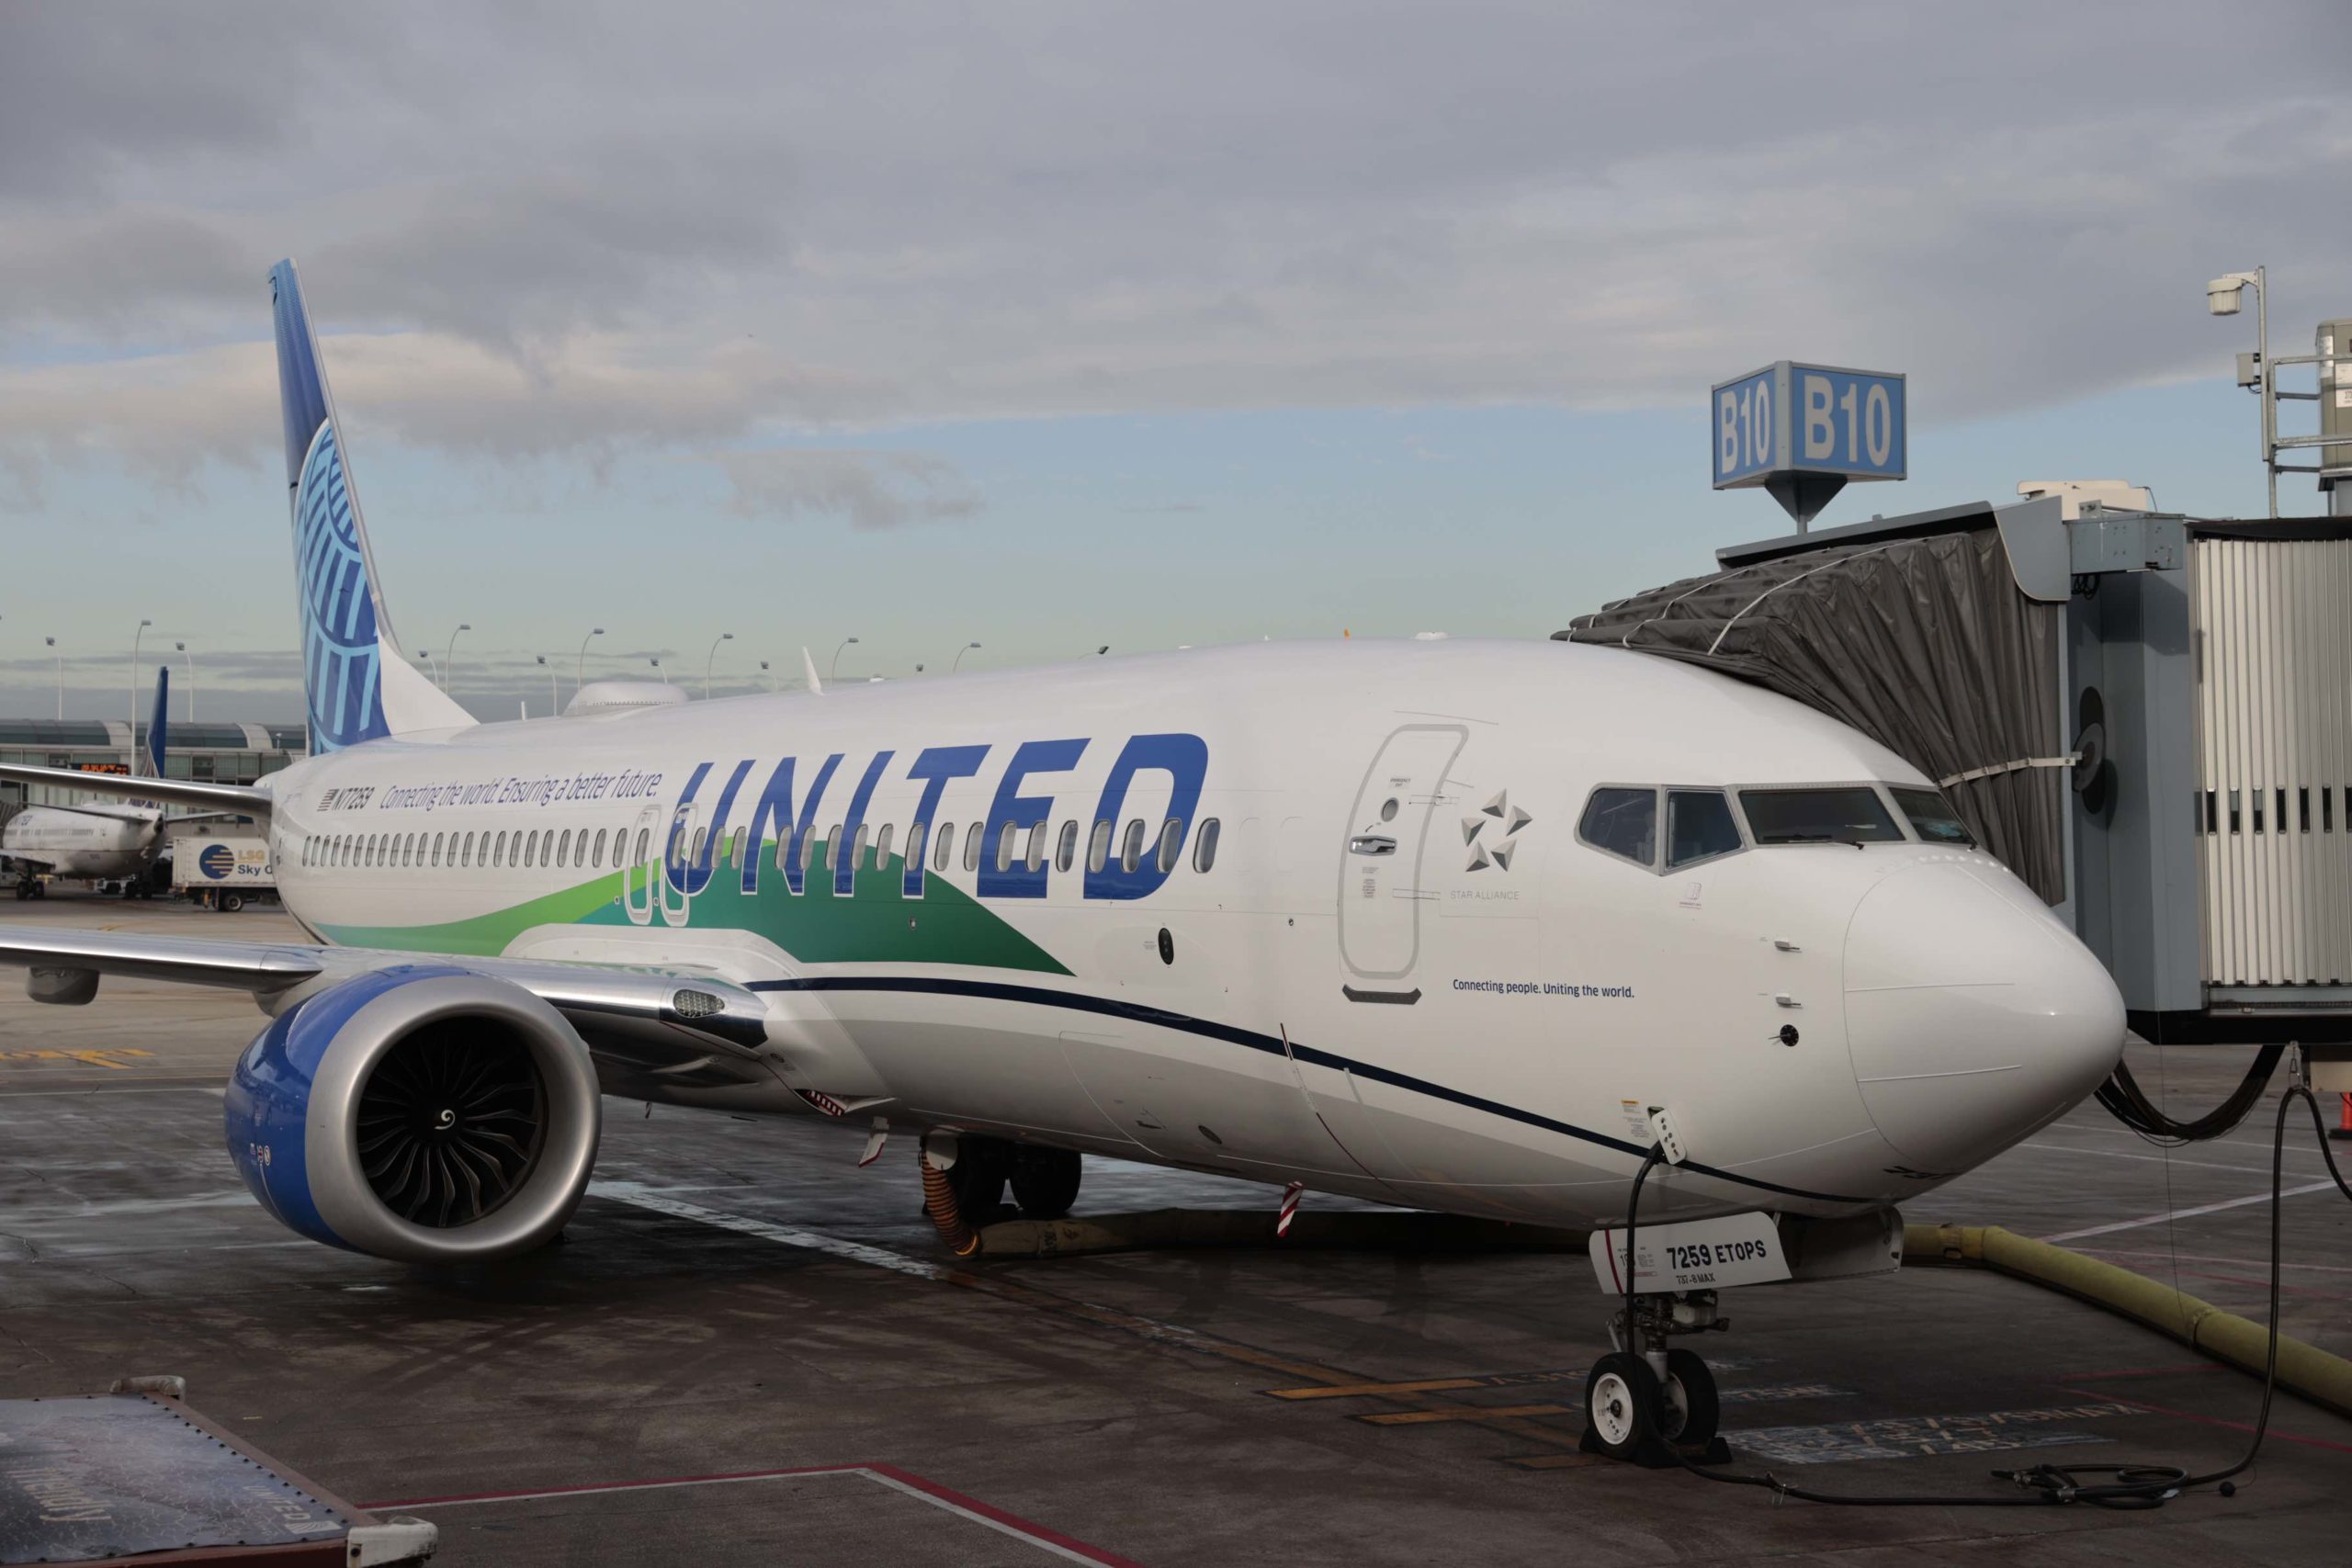 a white airplane with blue and green text on it